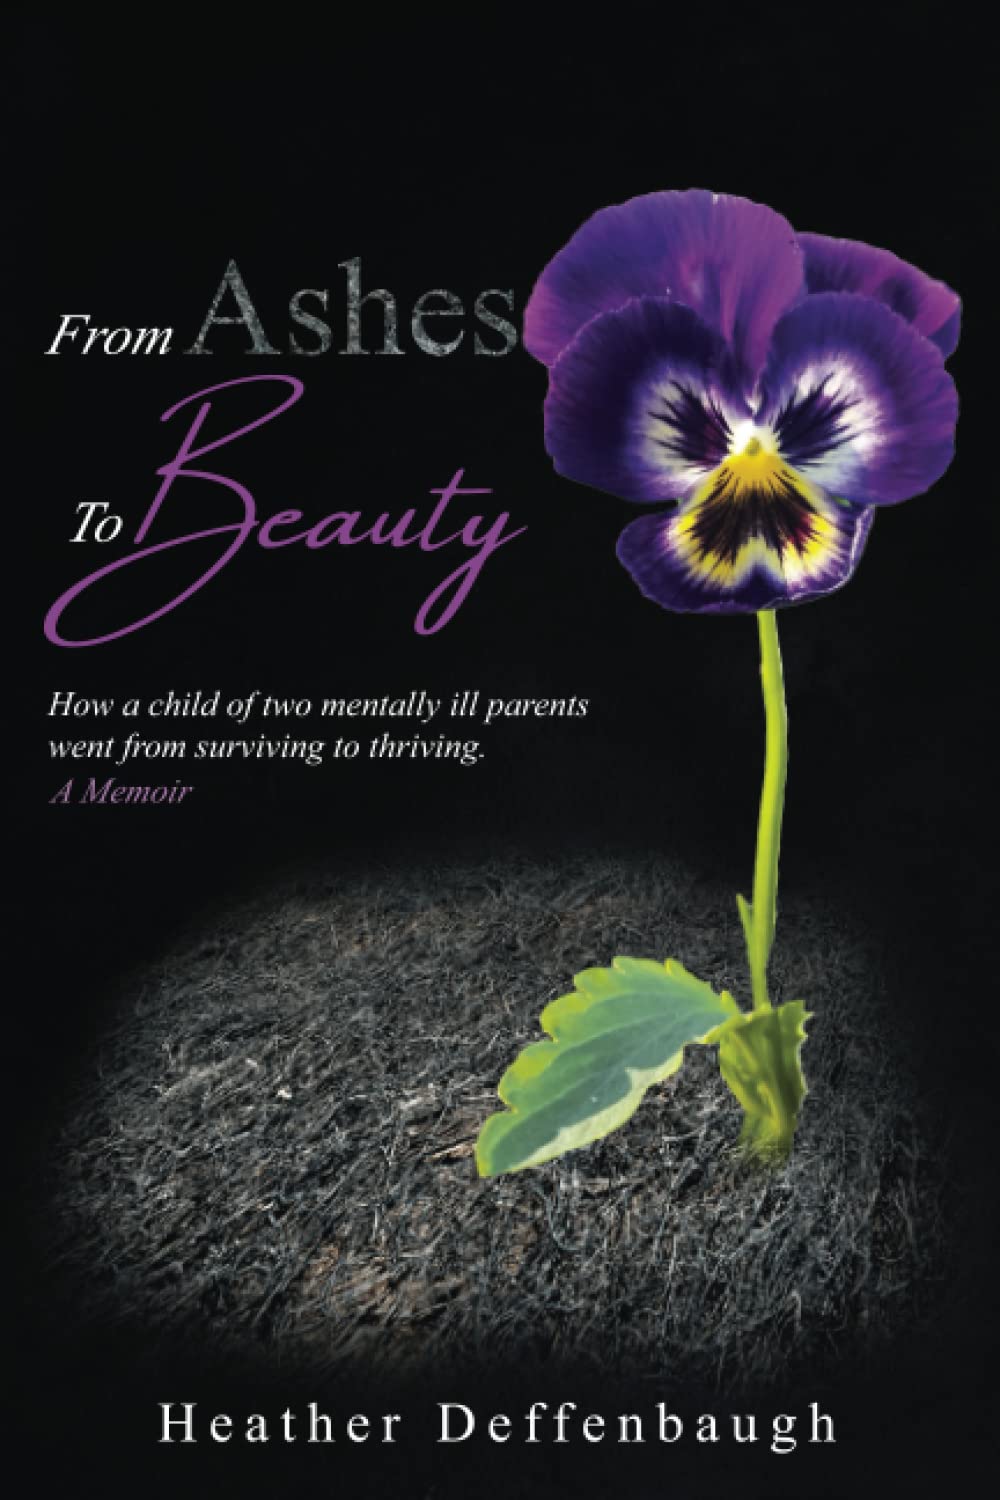 60. From Ashes to Beauty | Heather Deffenbaugh